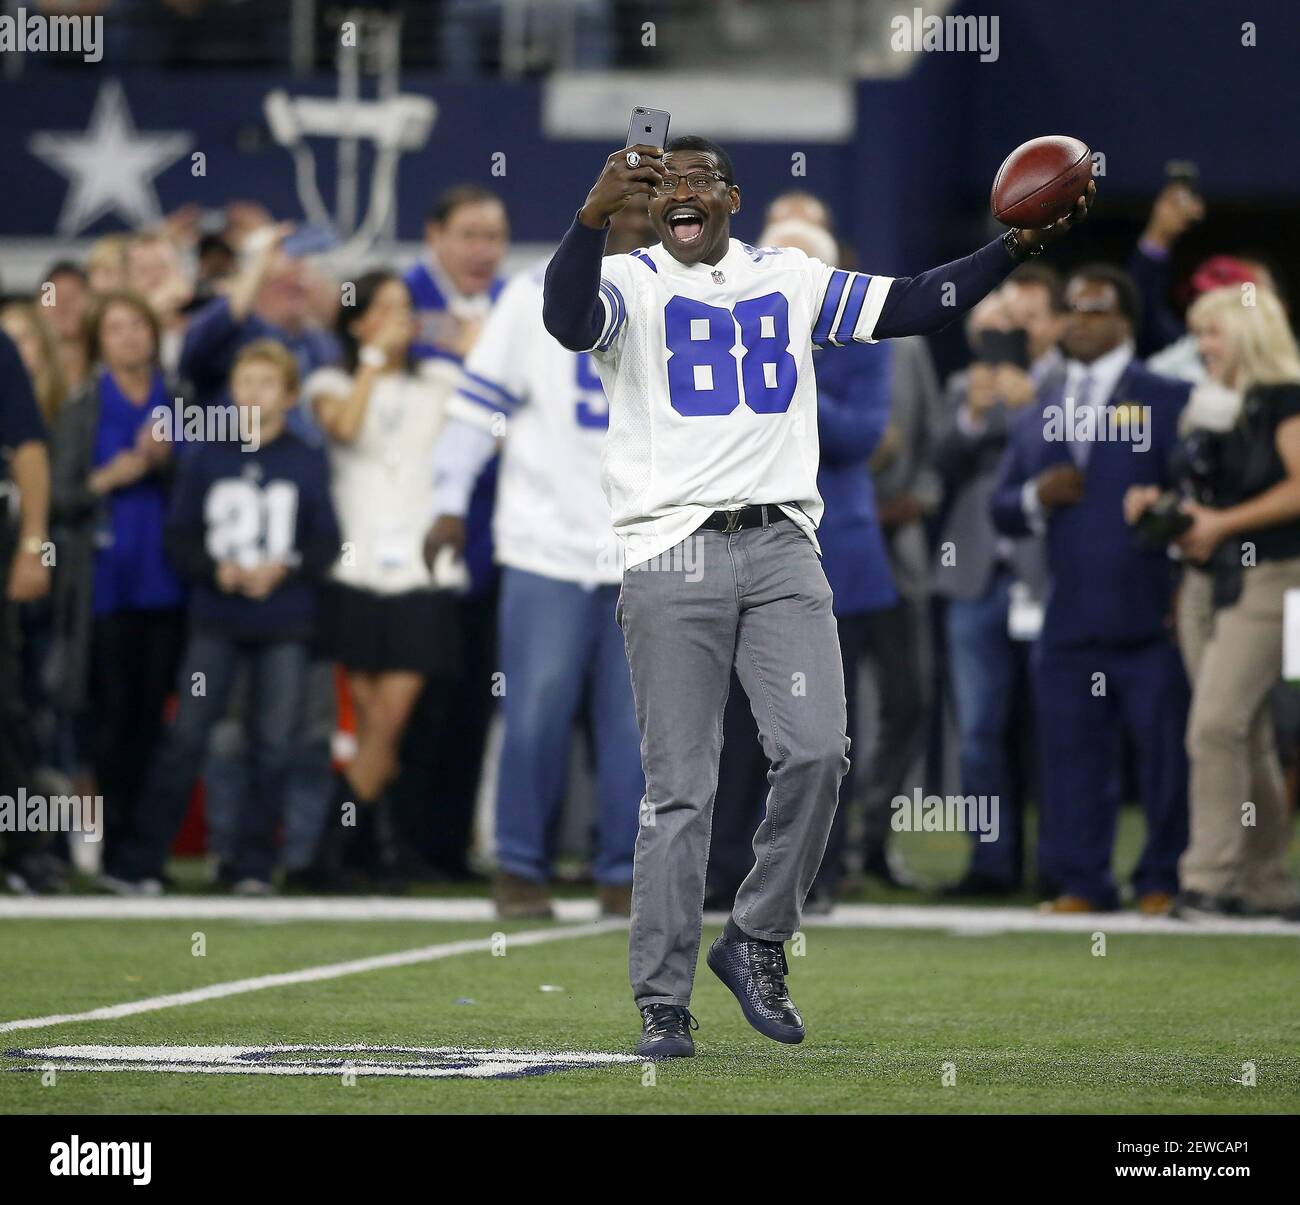 Former Dallas Cowboys receiver Michael Irvin (88) takes a selfie as he was  one of several players introduced from the 1992 Super Bowl team before a  game against the Philadelphia Eagles on